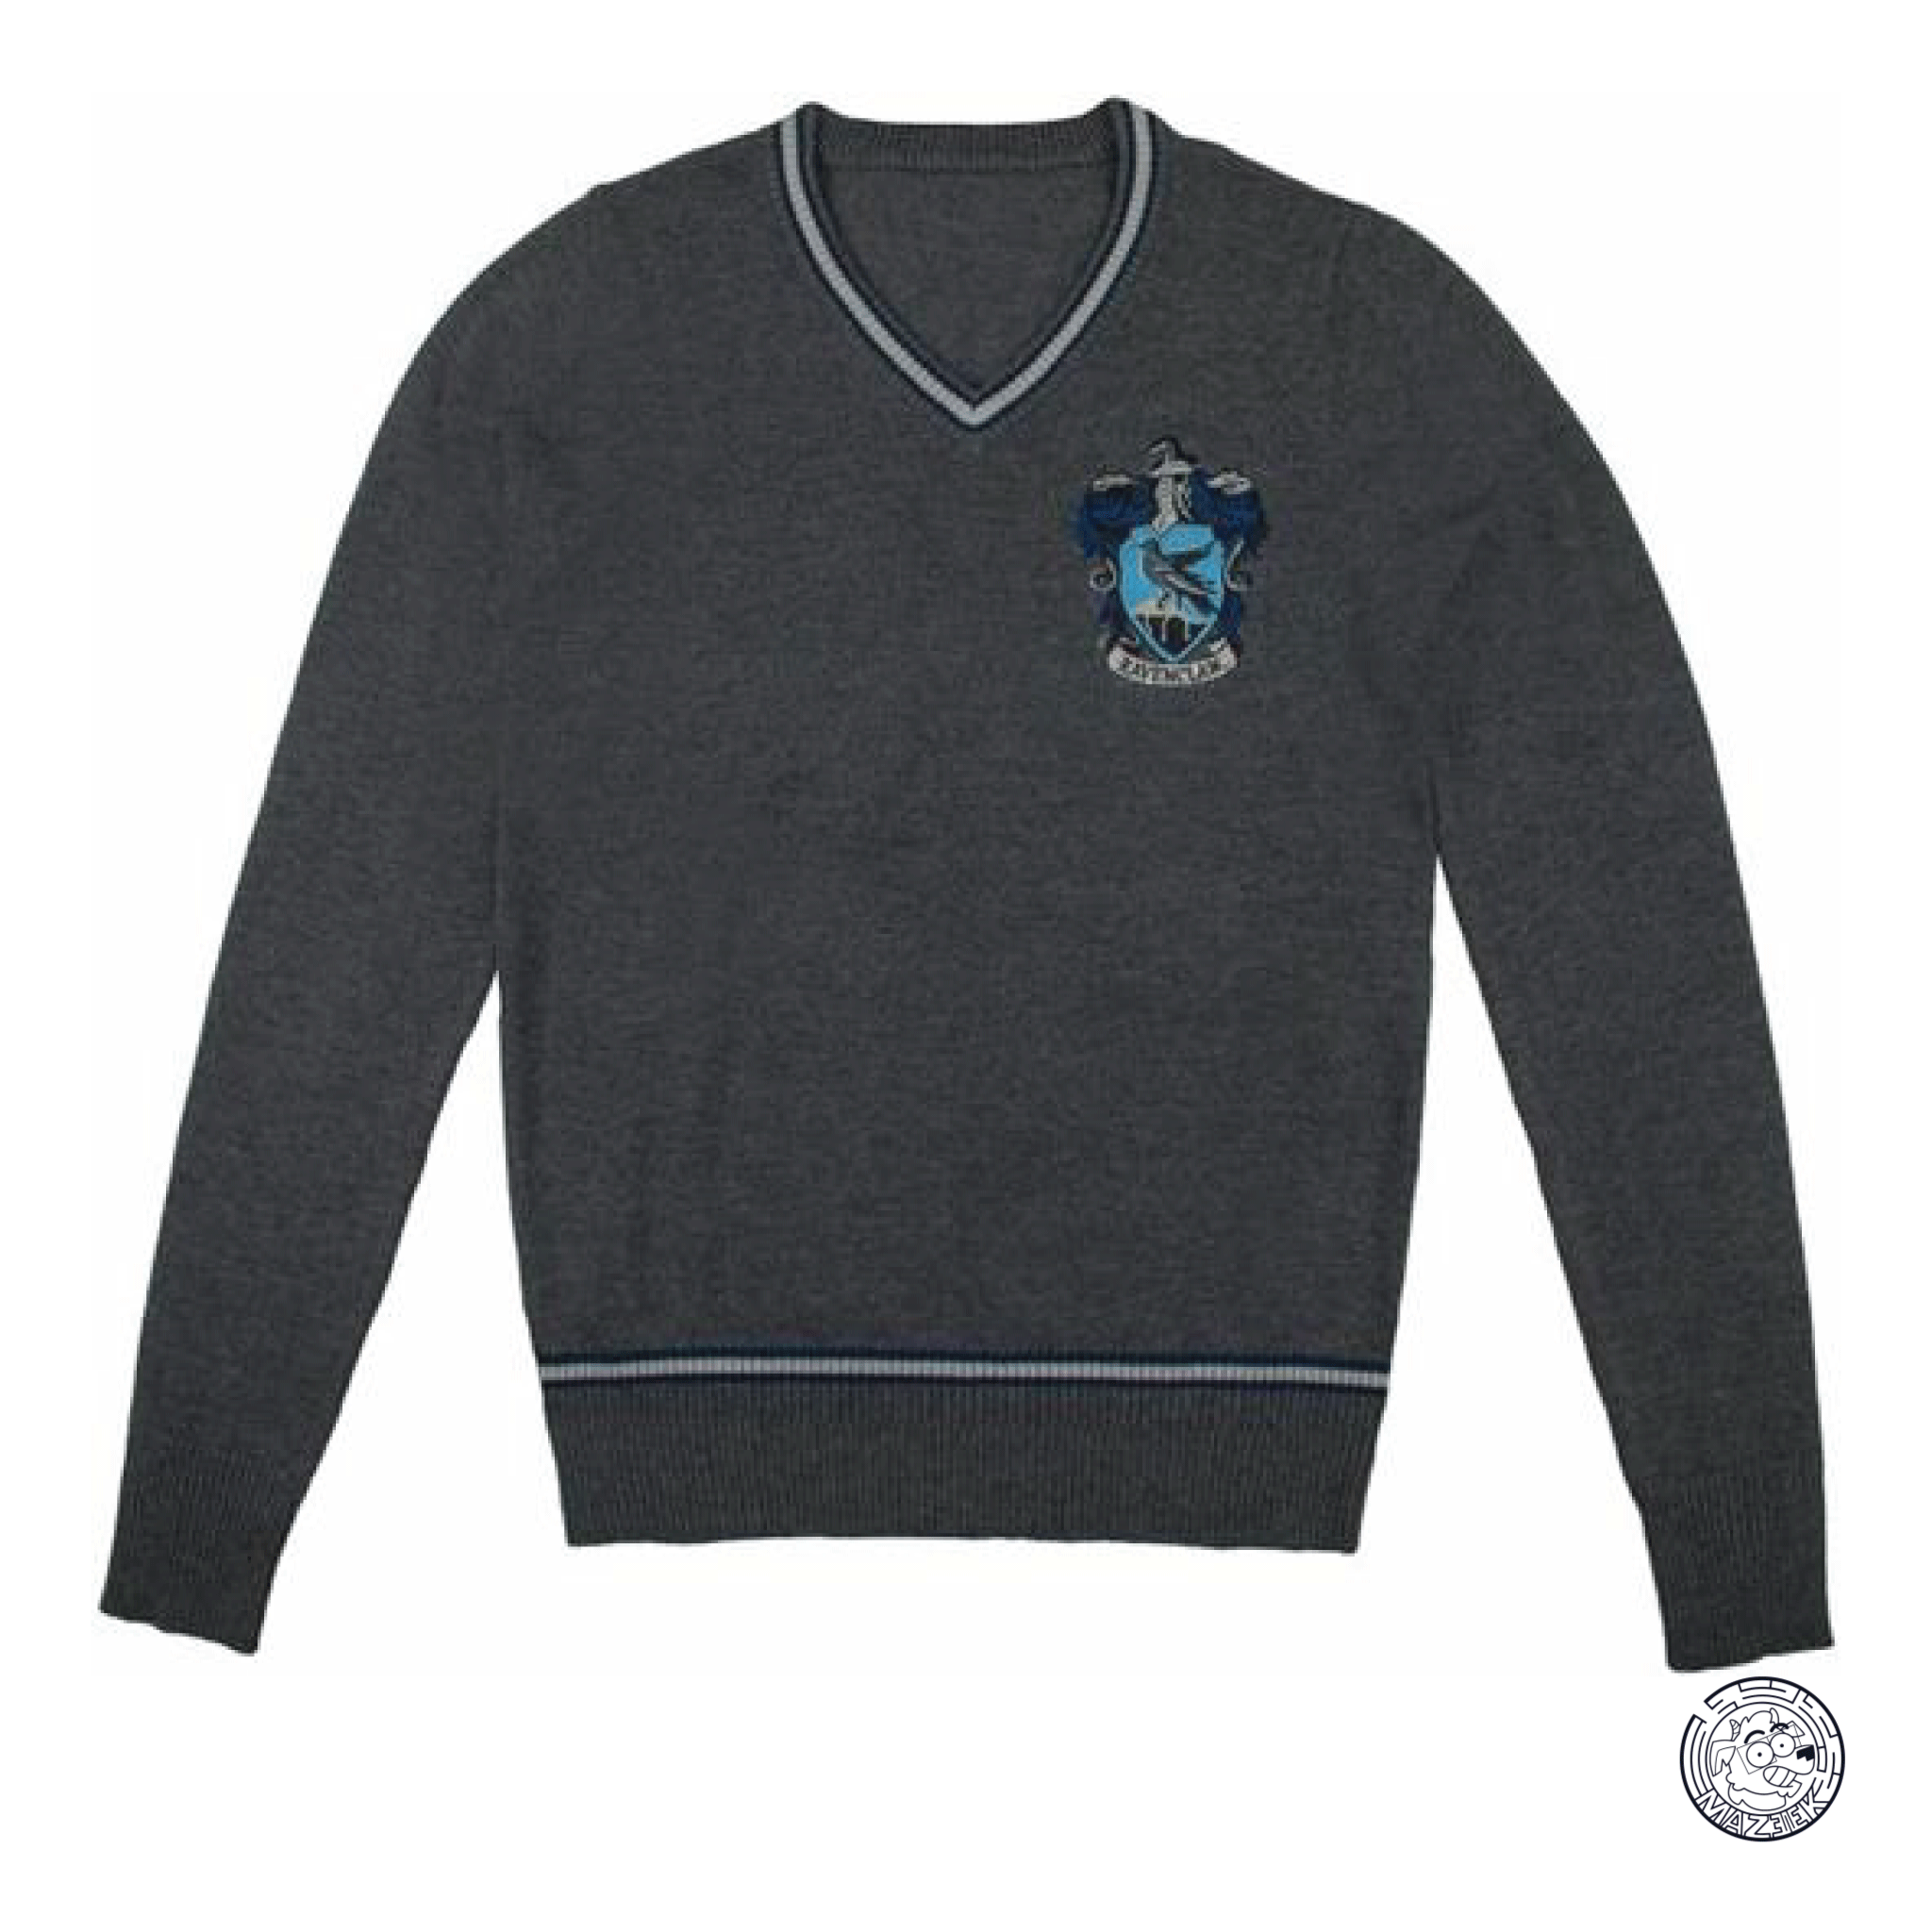 Harry Potter sweater: Ravenclaw - Size S